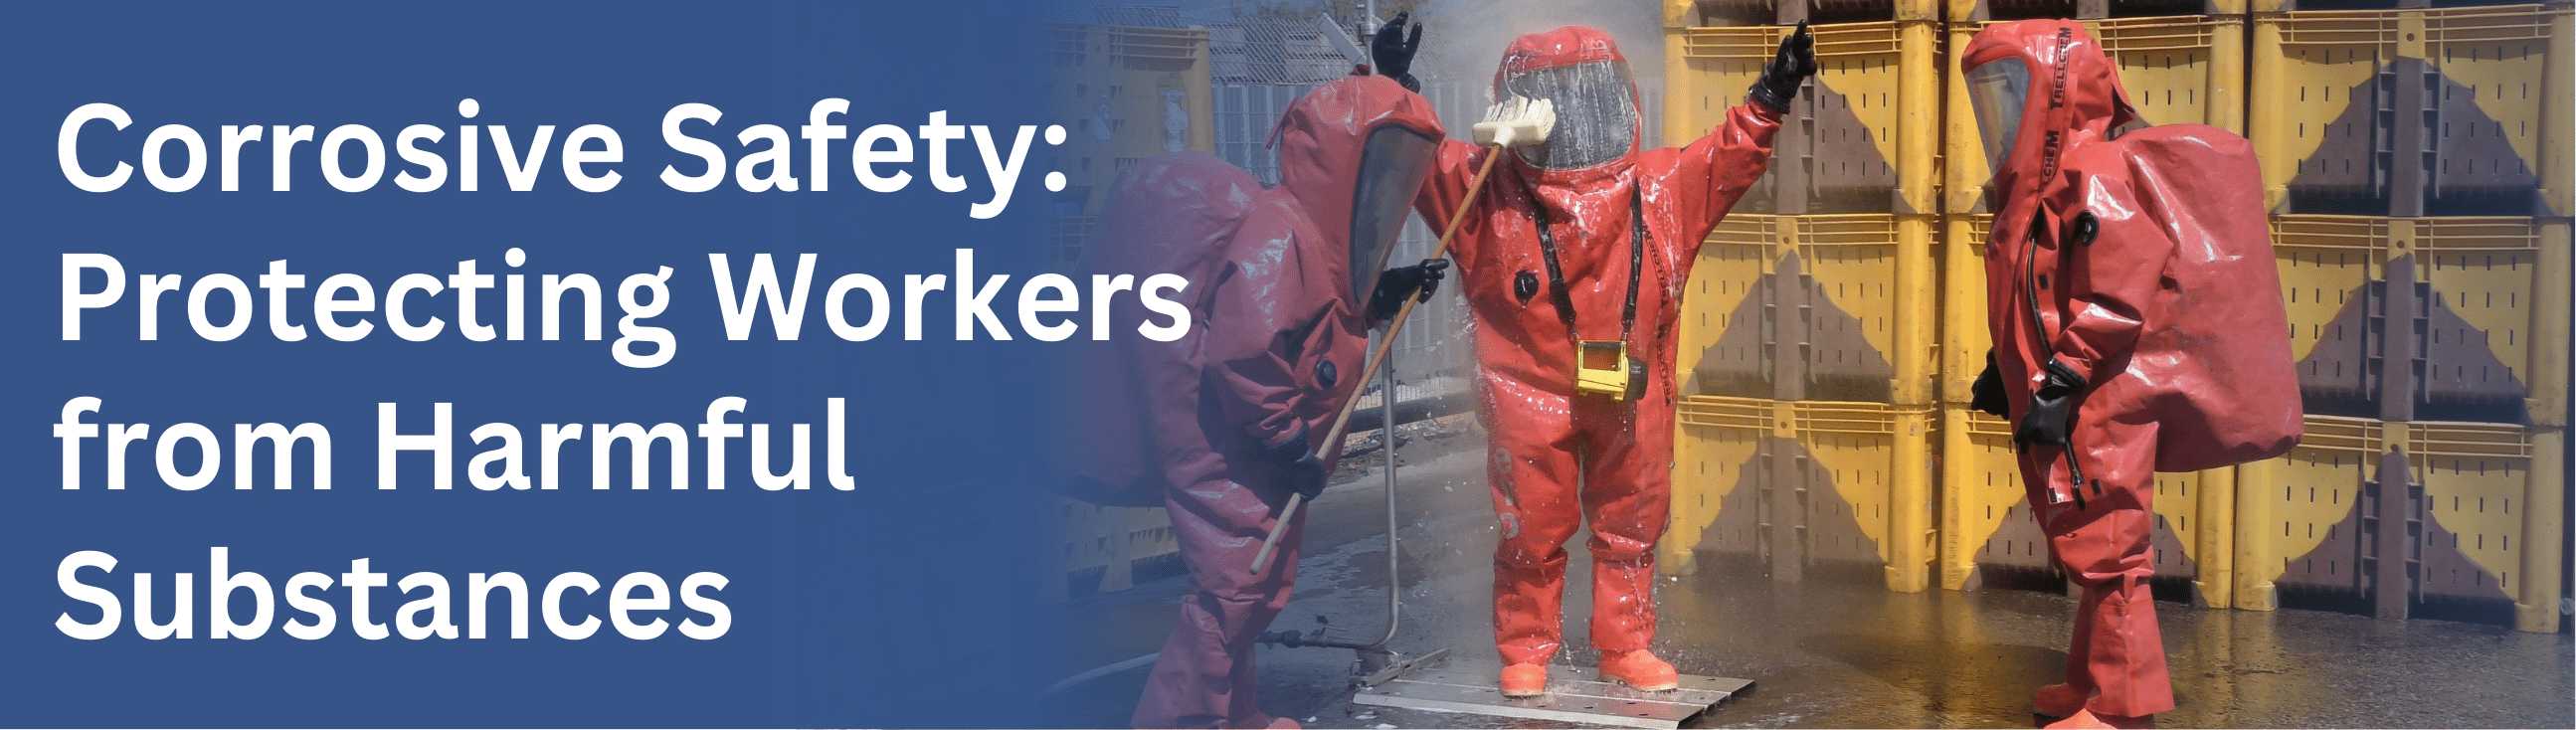 Corrosive Safety: Protecting Workers from Harmful Substances